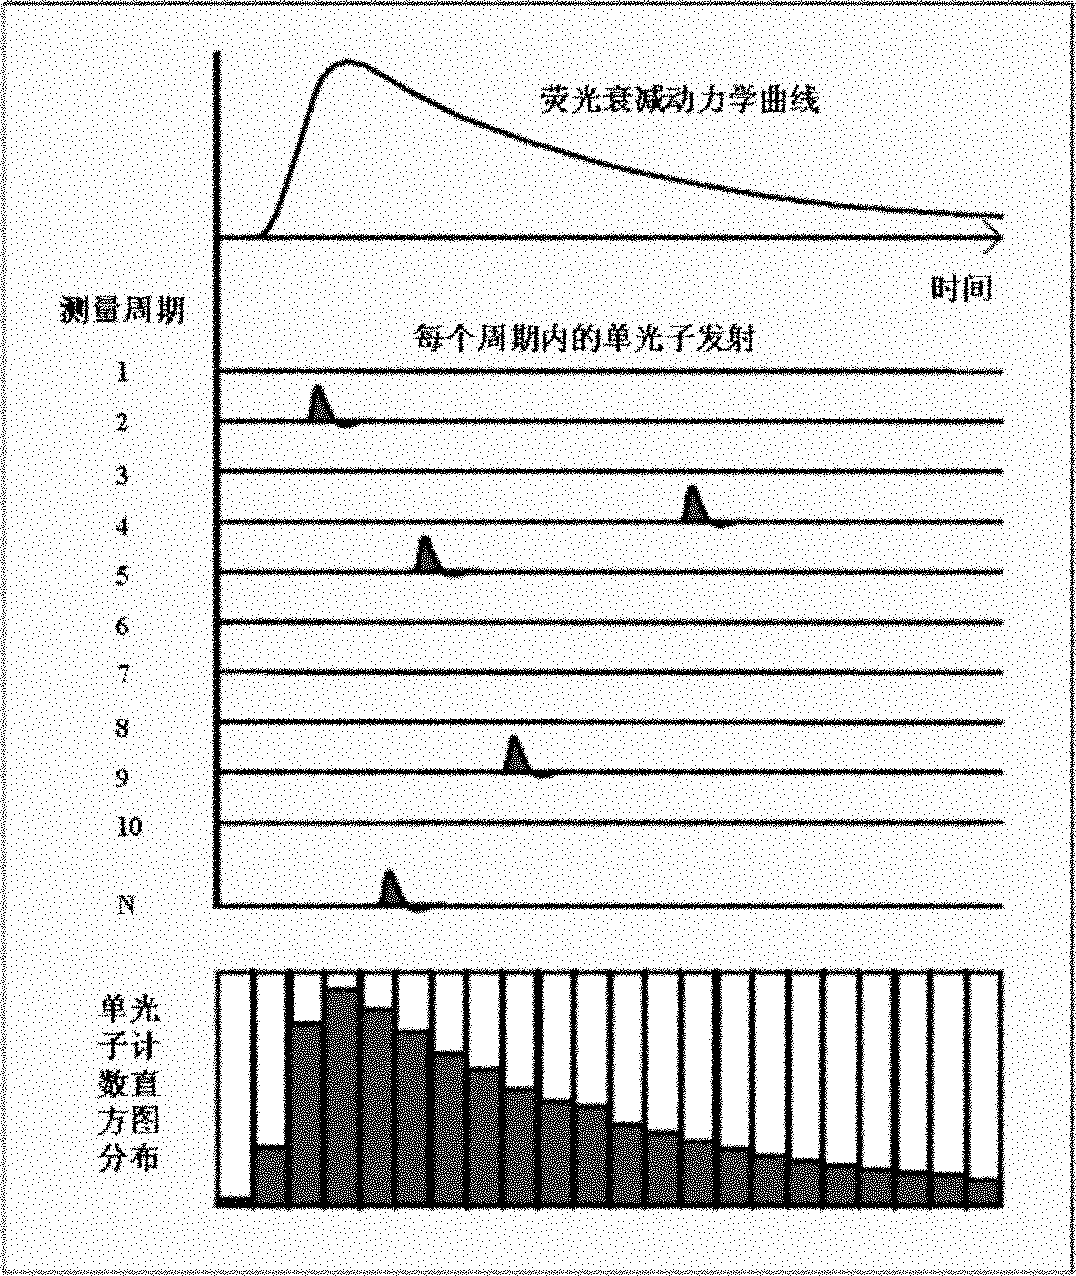 Transient fluorescence lifetime measurement method and measurement system based on single photon counting